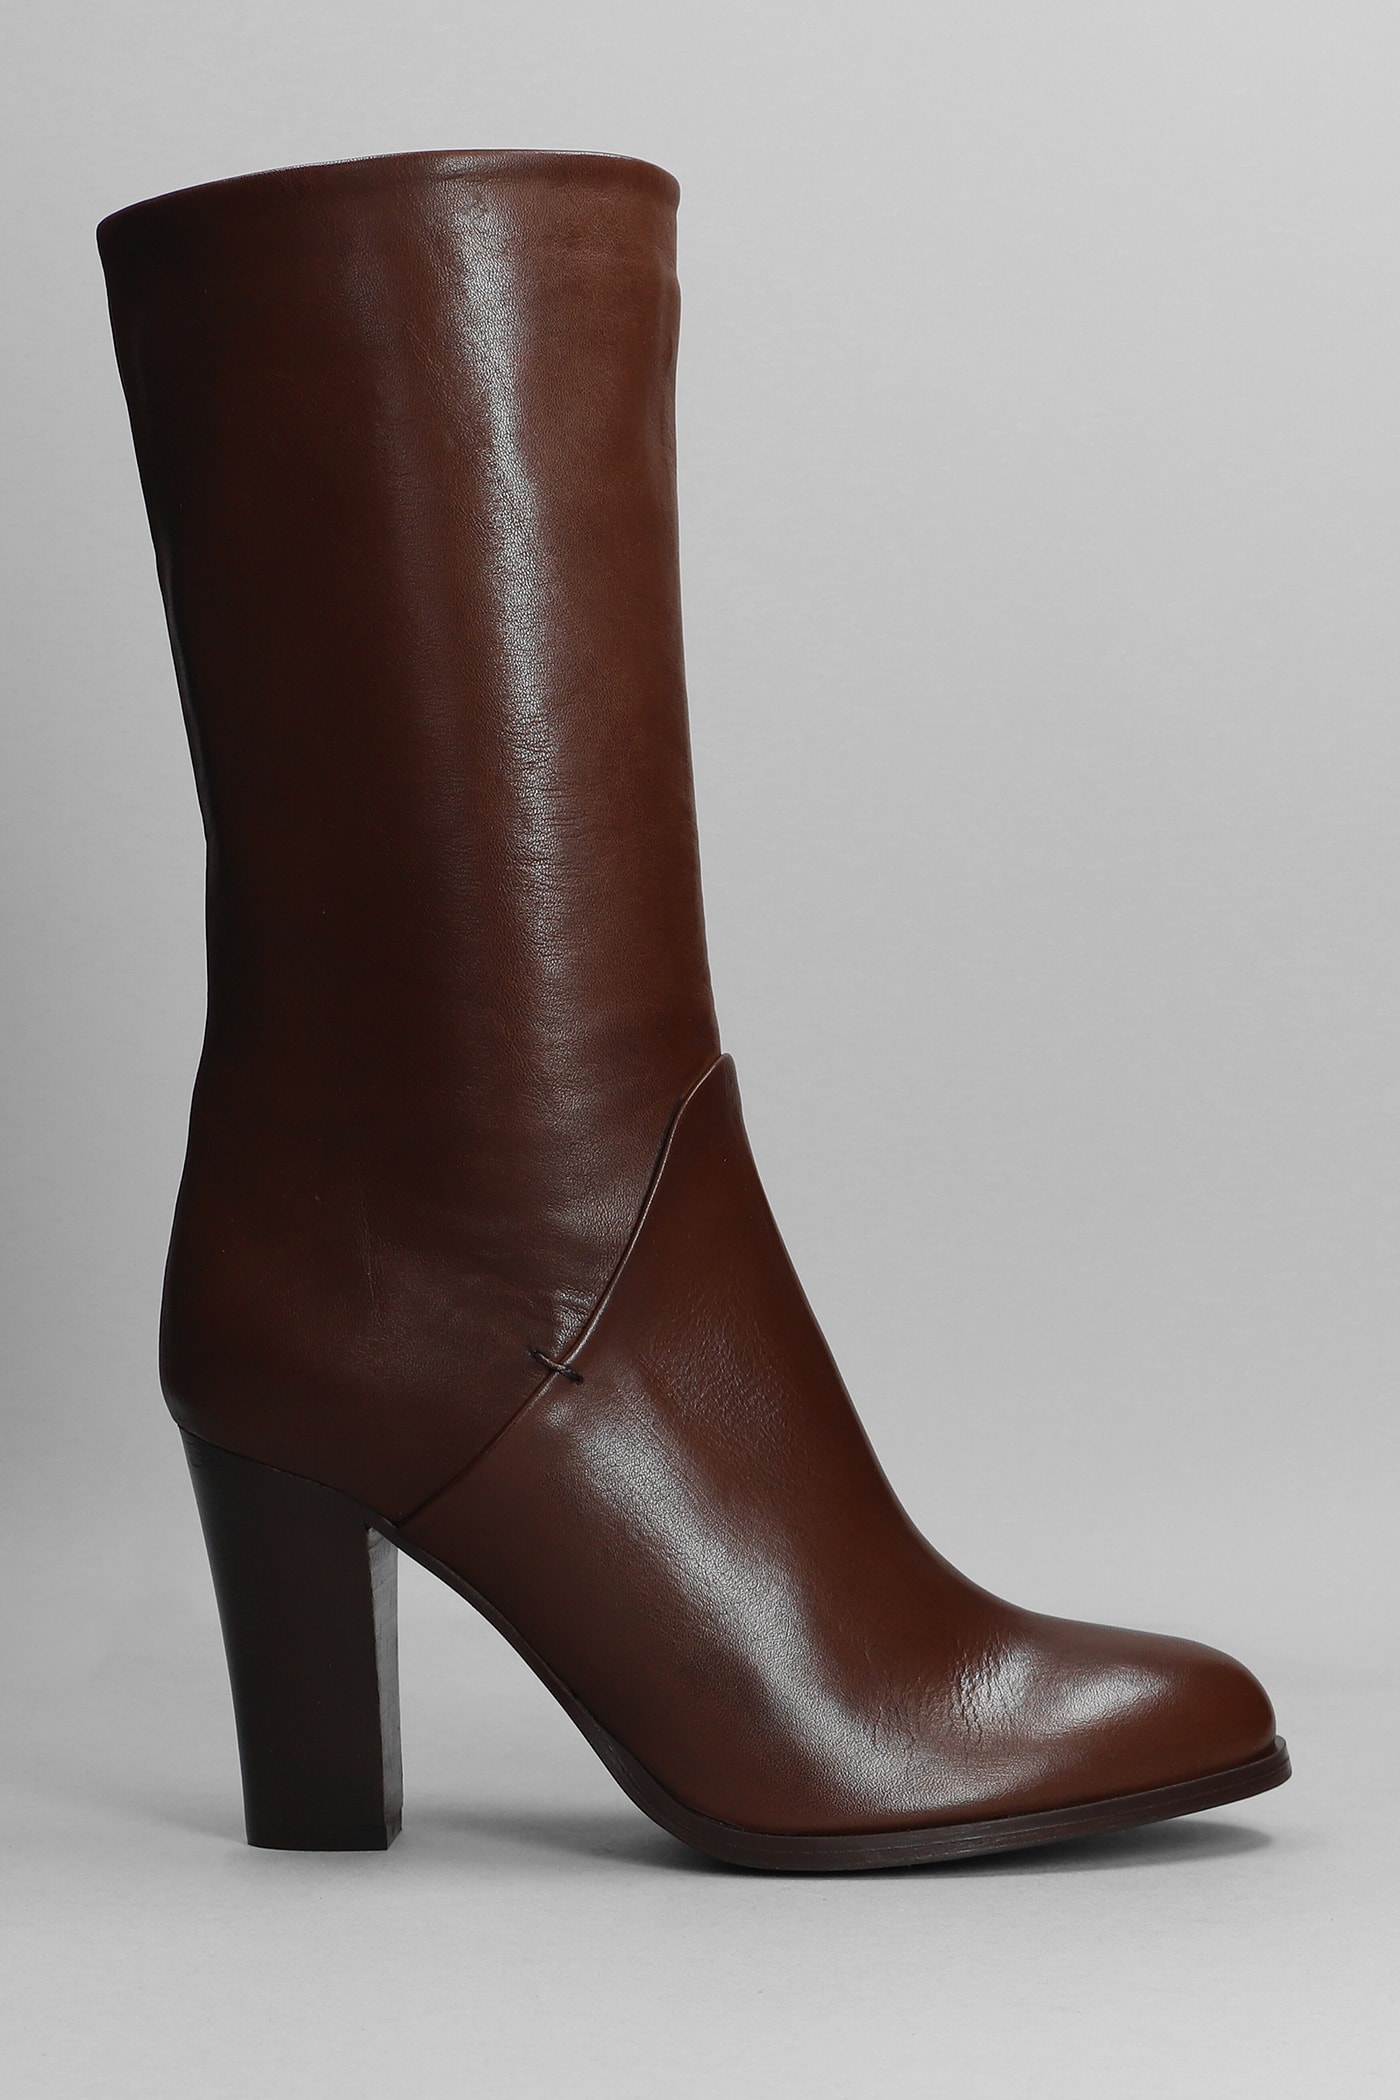 Julie Dee High Heels Ankle Boots In Brown Leather